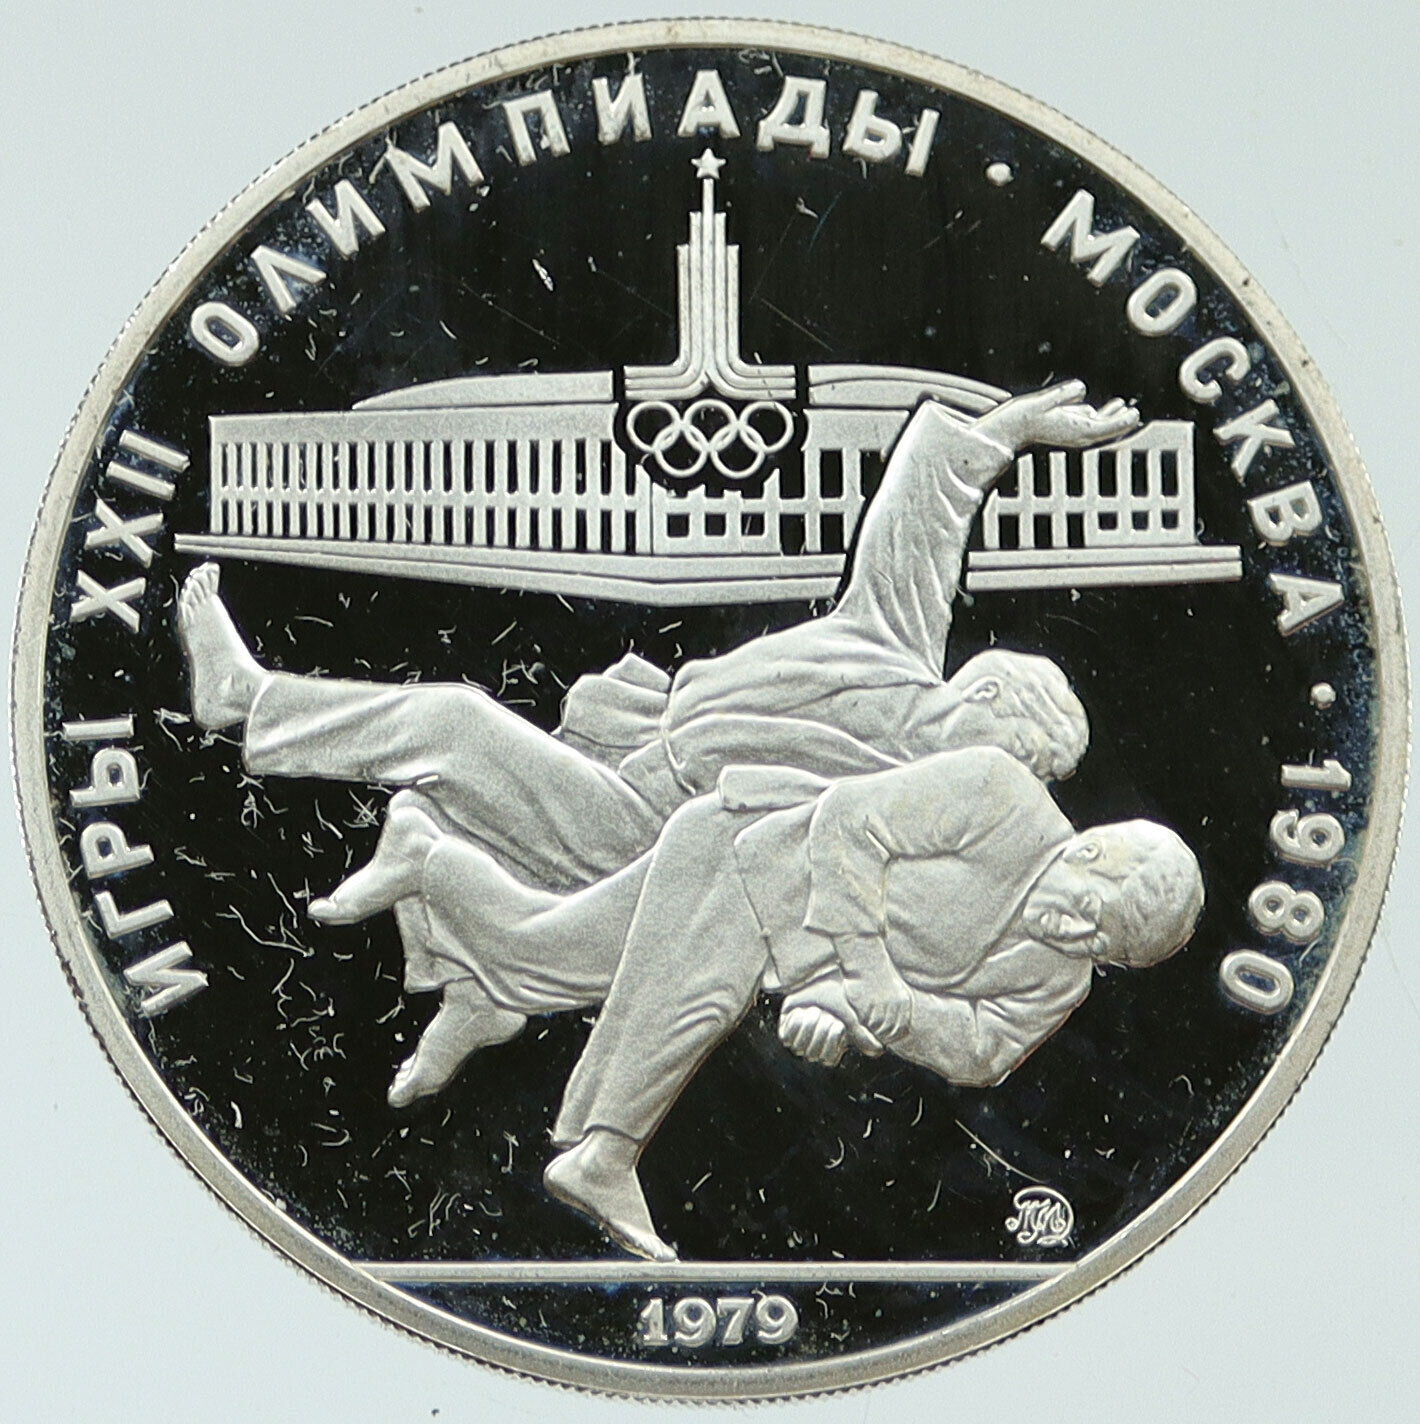 1980 MOSCOW Summer Olympics 1979 JUDO KARATE Proof Silver 10 Ruble Coin i116966